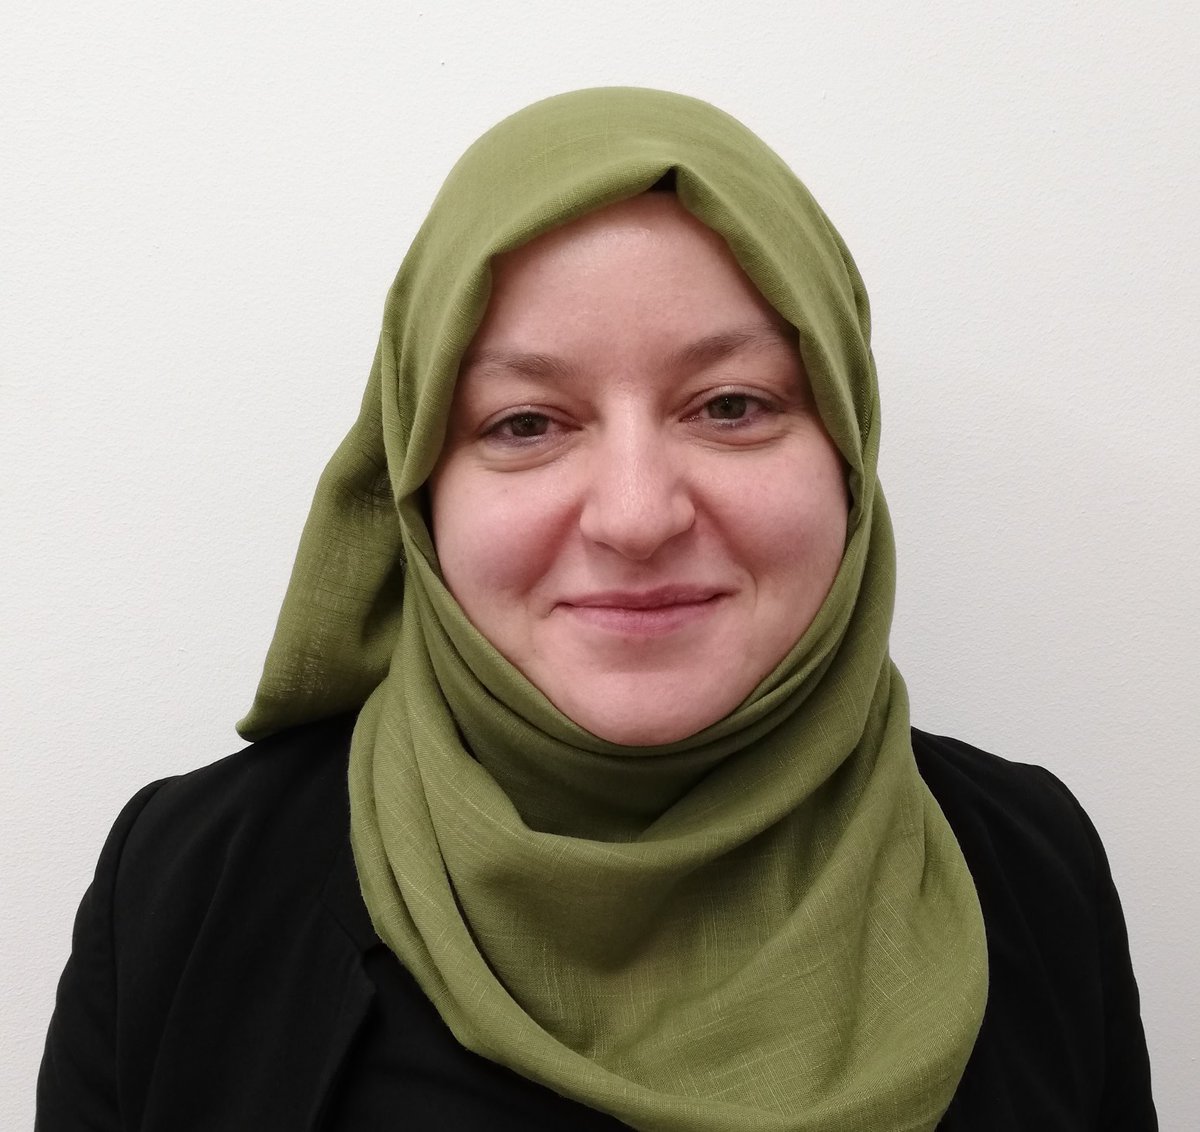 This legendary lady is Ayesha Basit, one of our Contract Managers, and a finalist in the Women in Construction category of the @ConstructExpo South East Construction Awards. We hope you'll join us in congratulating her and wishing her best of luck in hopefully winning the award!